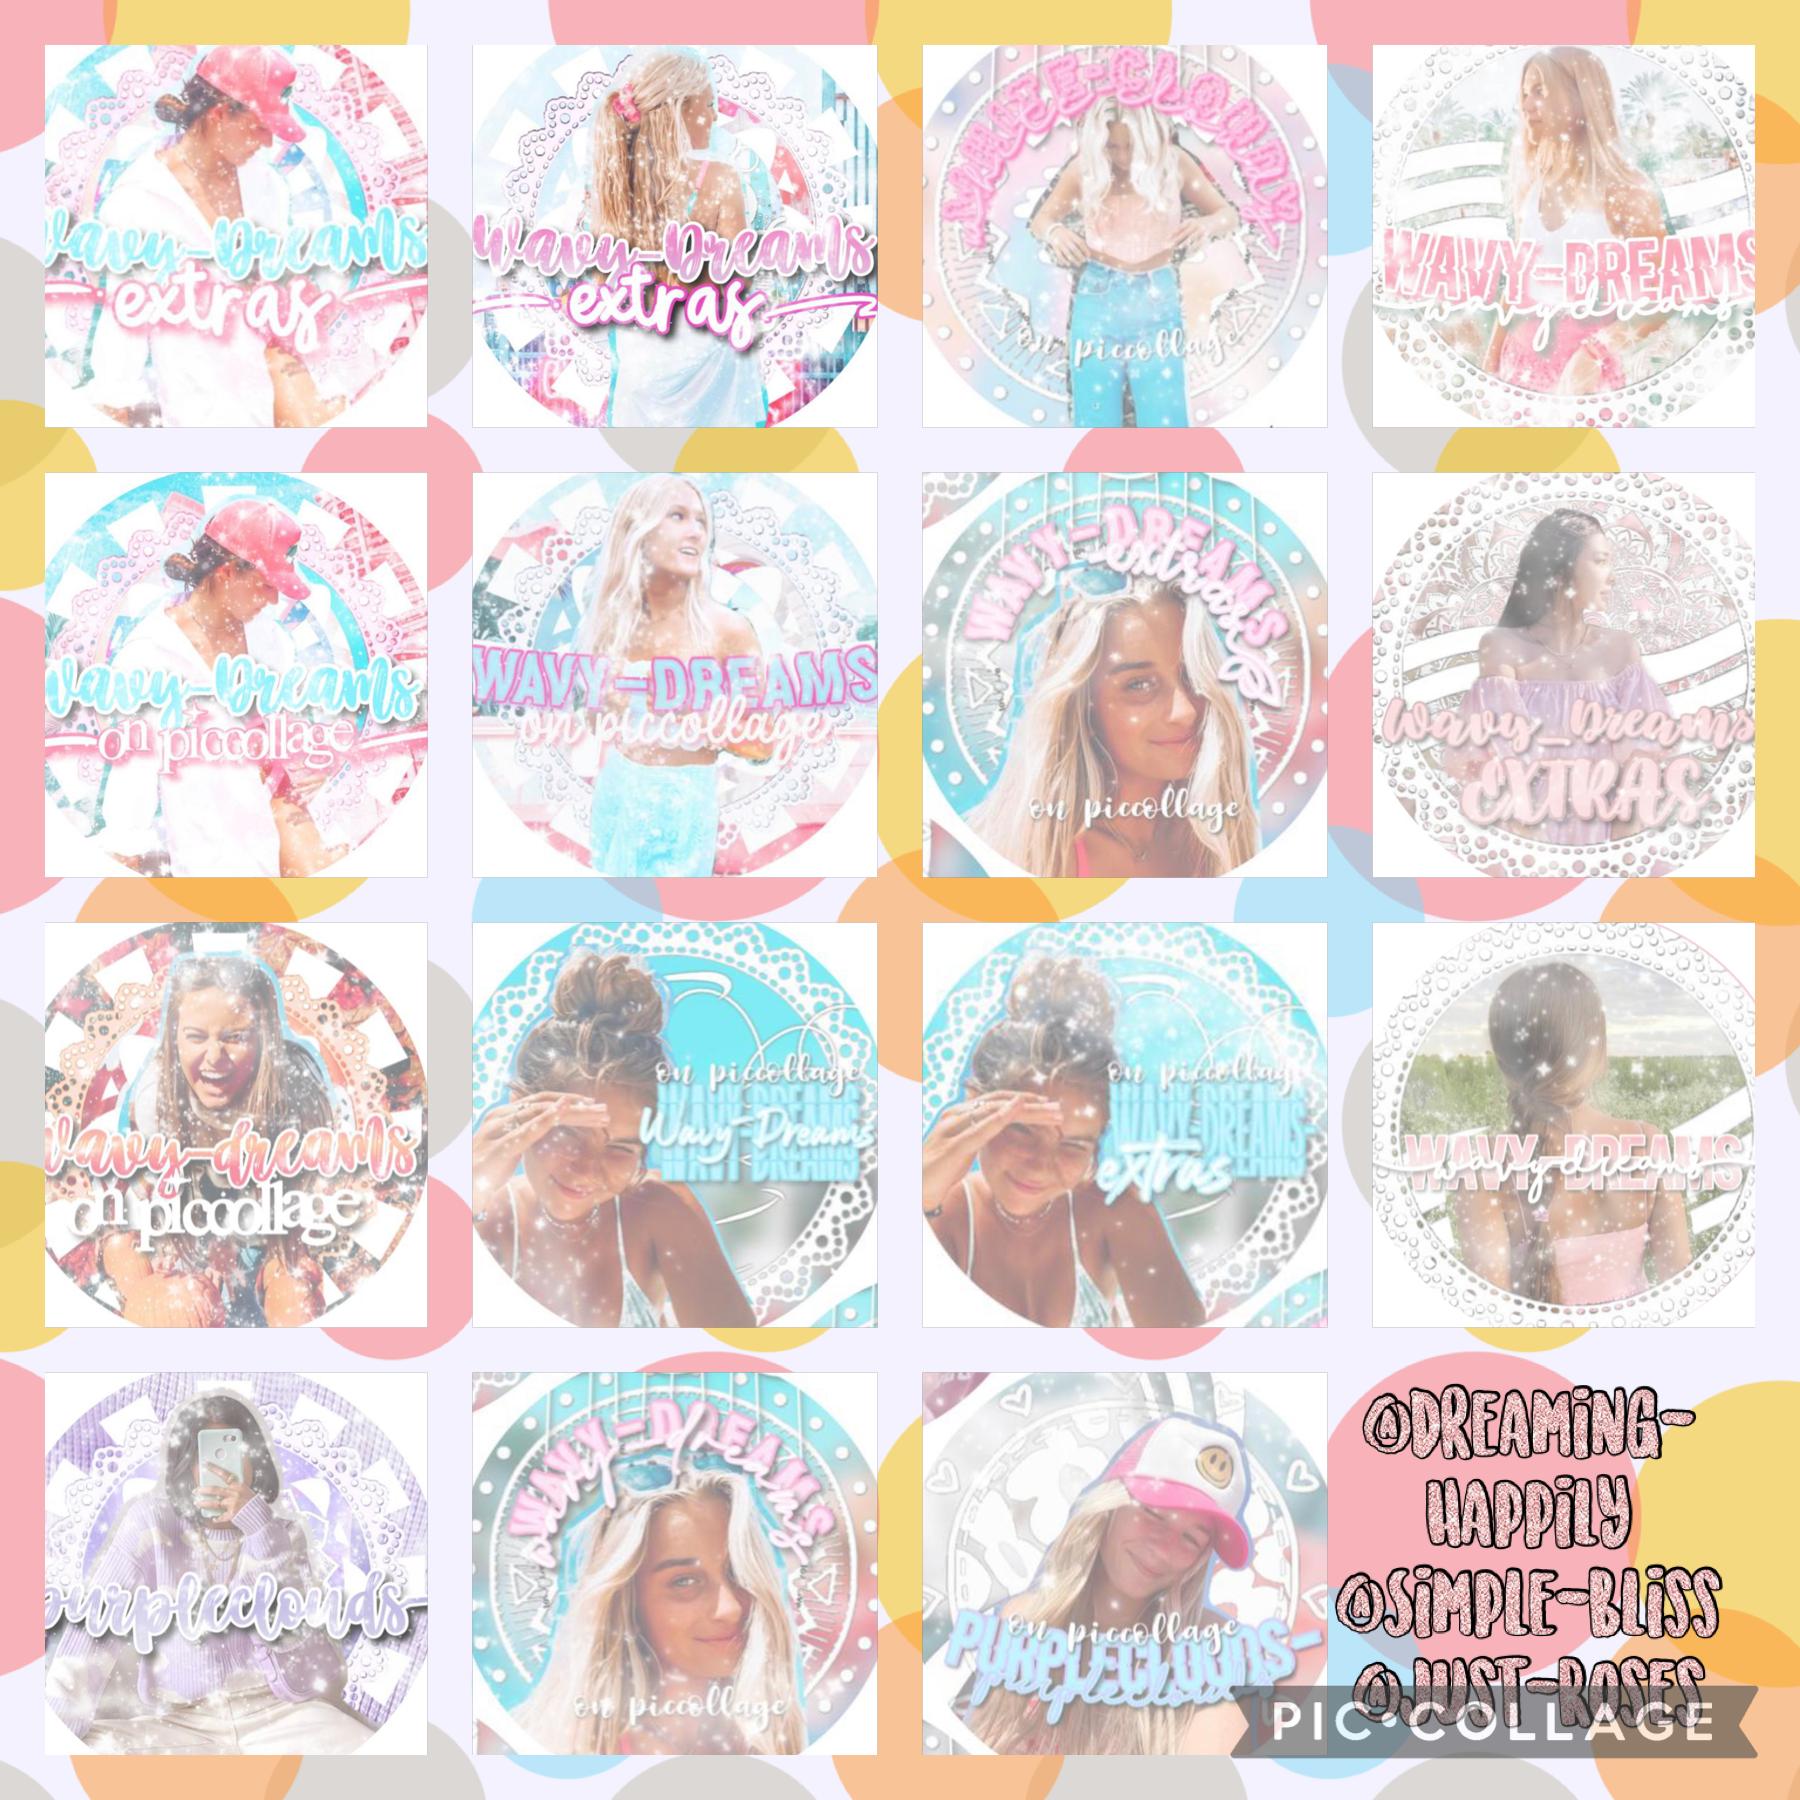 🎨Shoutout to the amazing icon makers!🎨
I know I am doing this so often rn. *hahah:)*
Our amazing icons—
Special shoutout to: Dancingintherain! She is a great icon marker too! I have requested soooooooo many icons. But I just don’t have space to show anoth